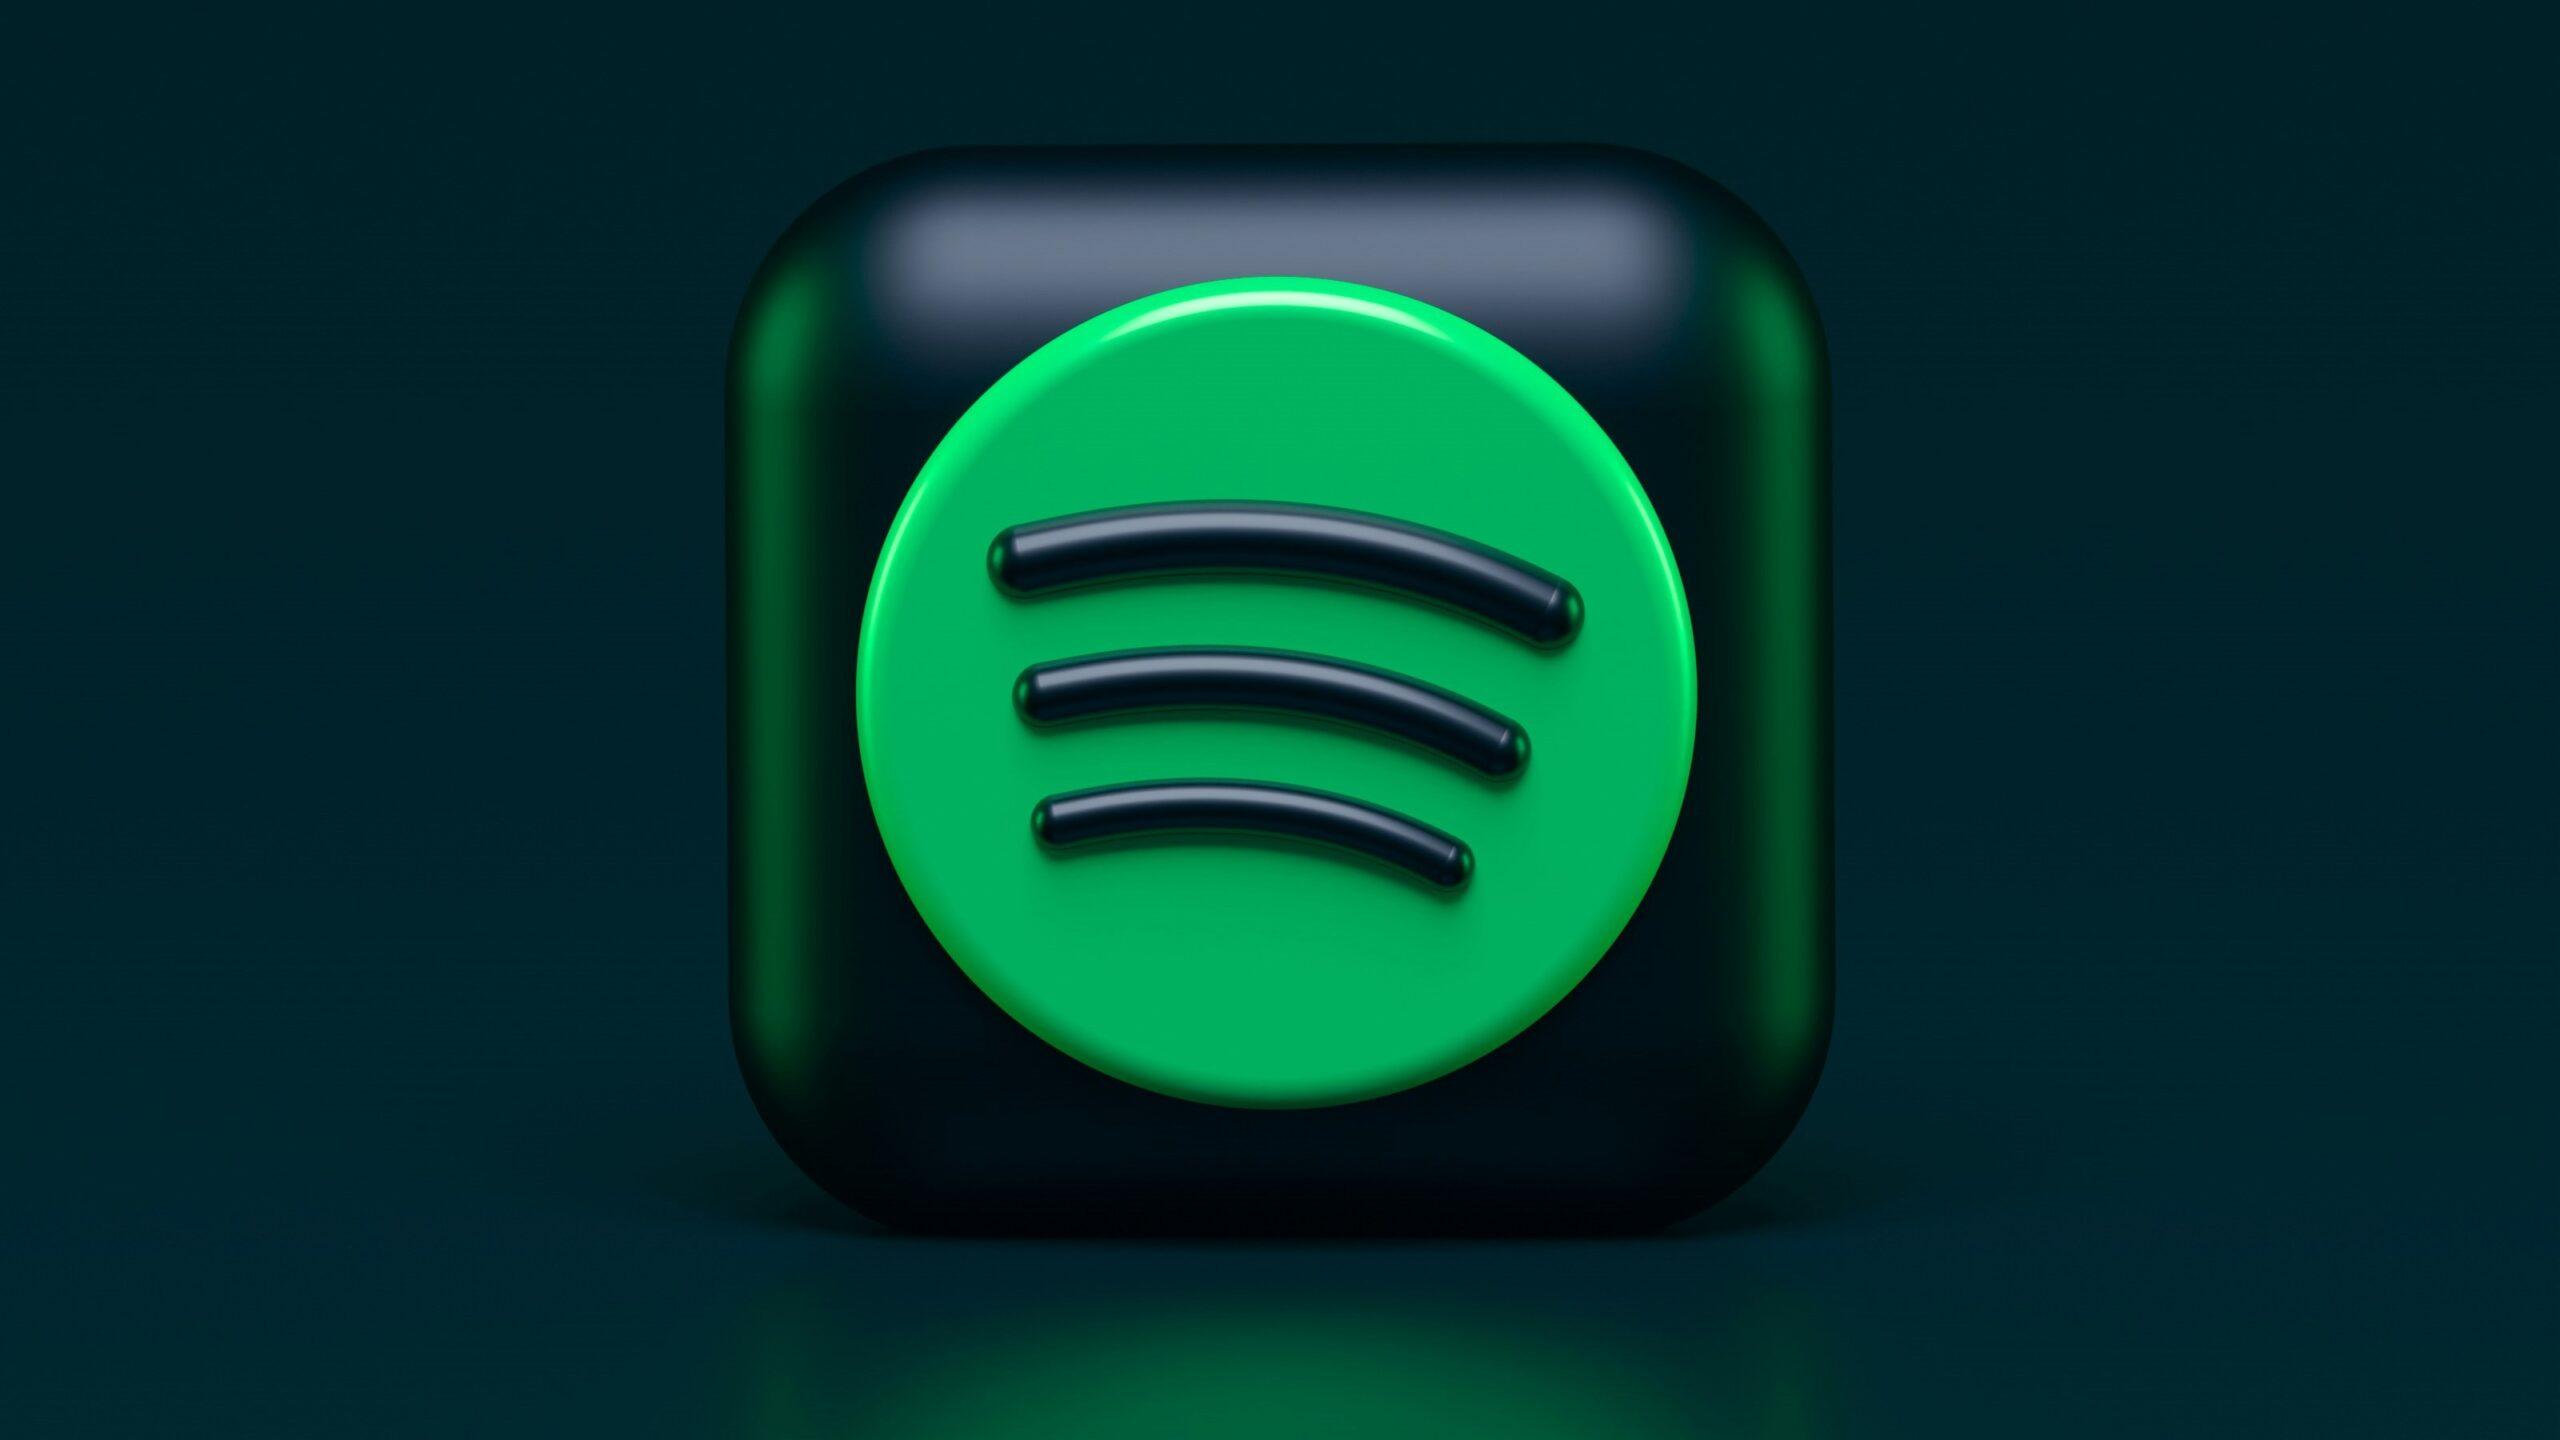 Spotify logo appearing on a cube-shaped object against a darkened background.